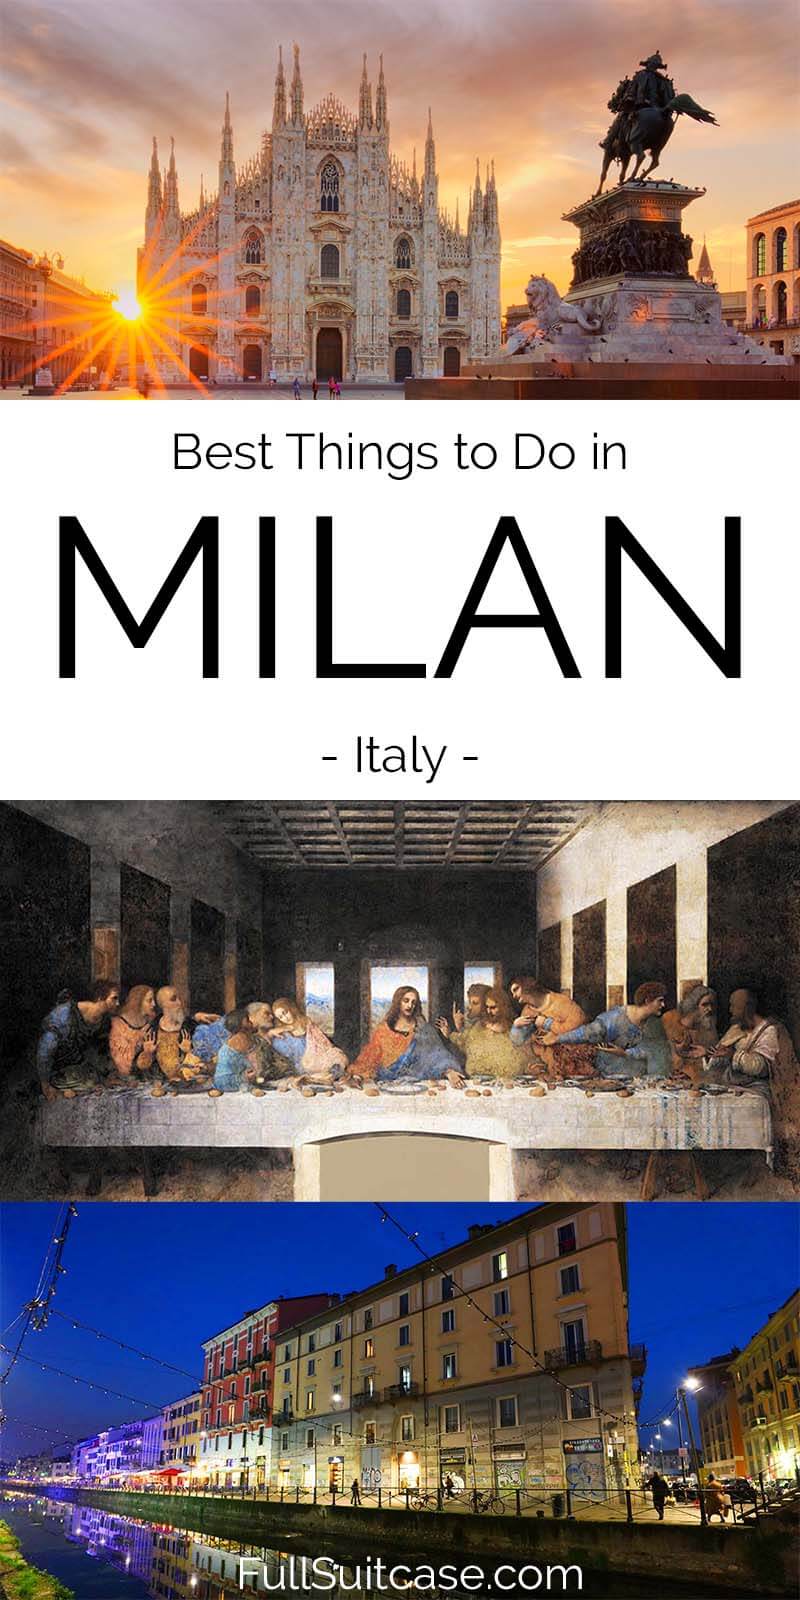 Best places to see and things to do in Milan, Italy